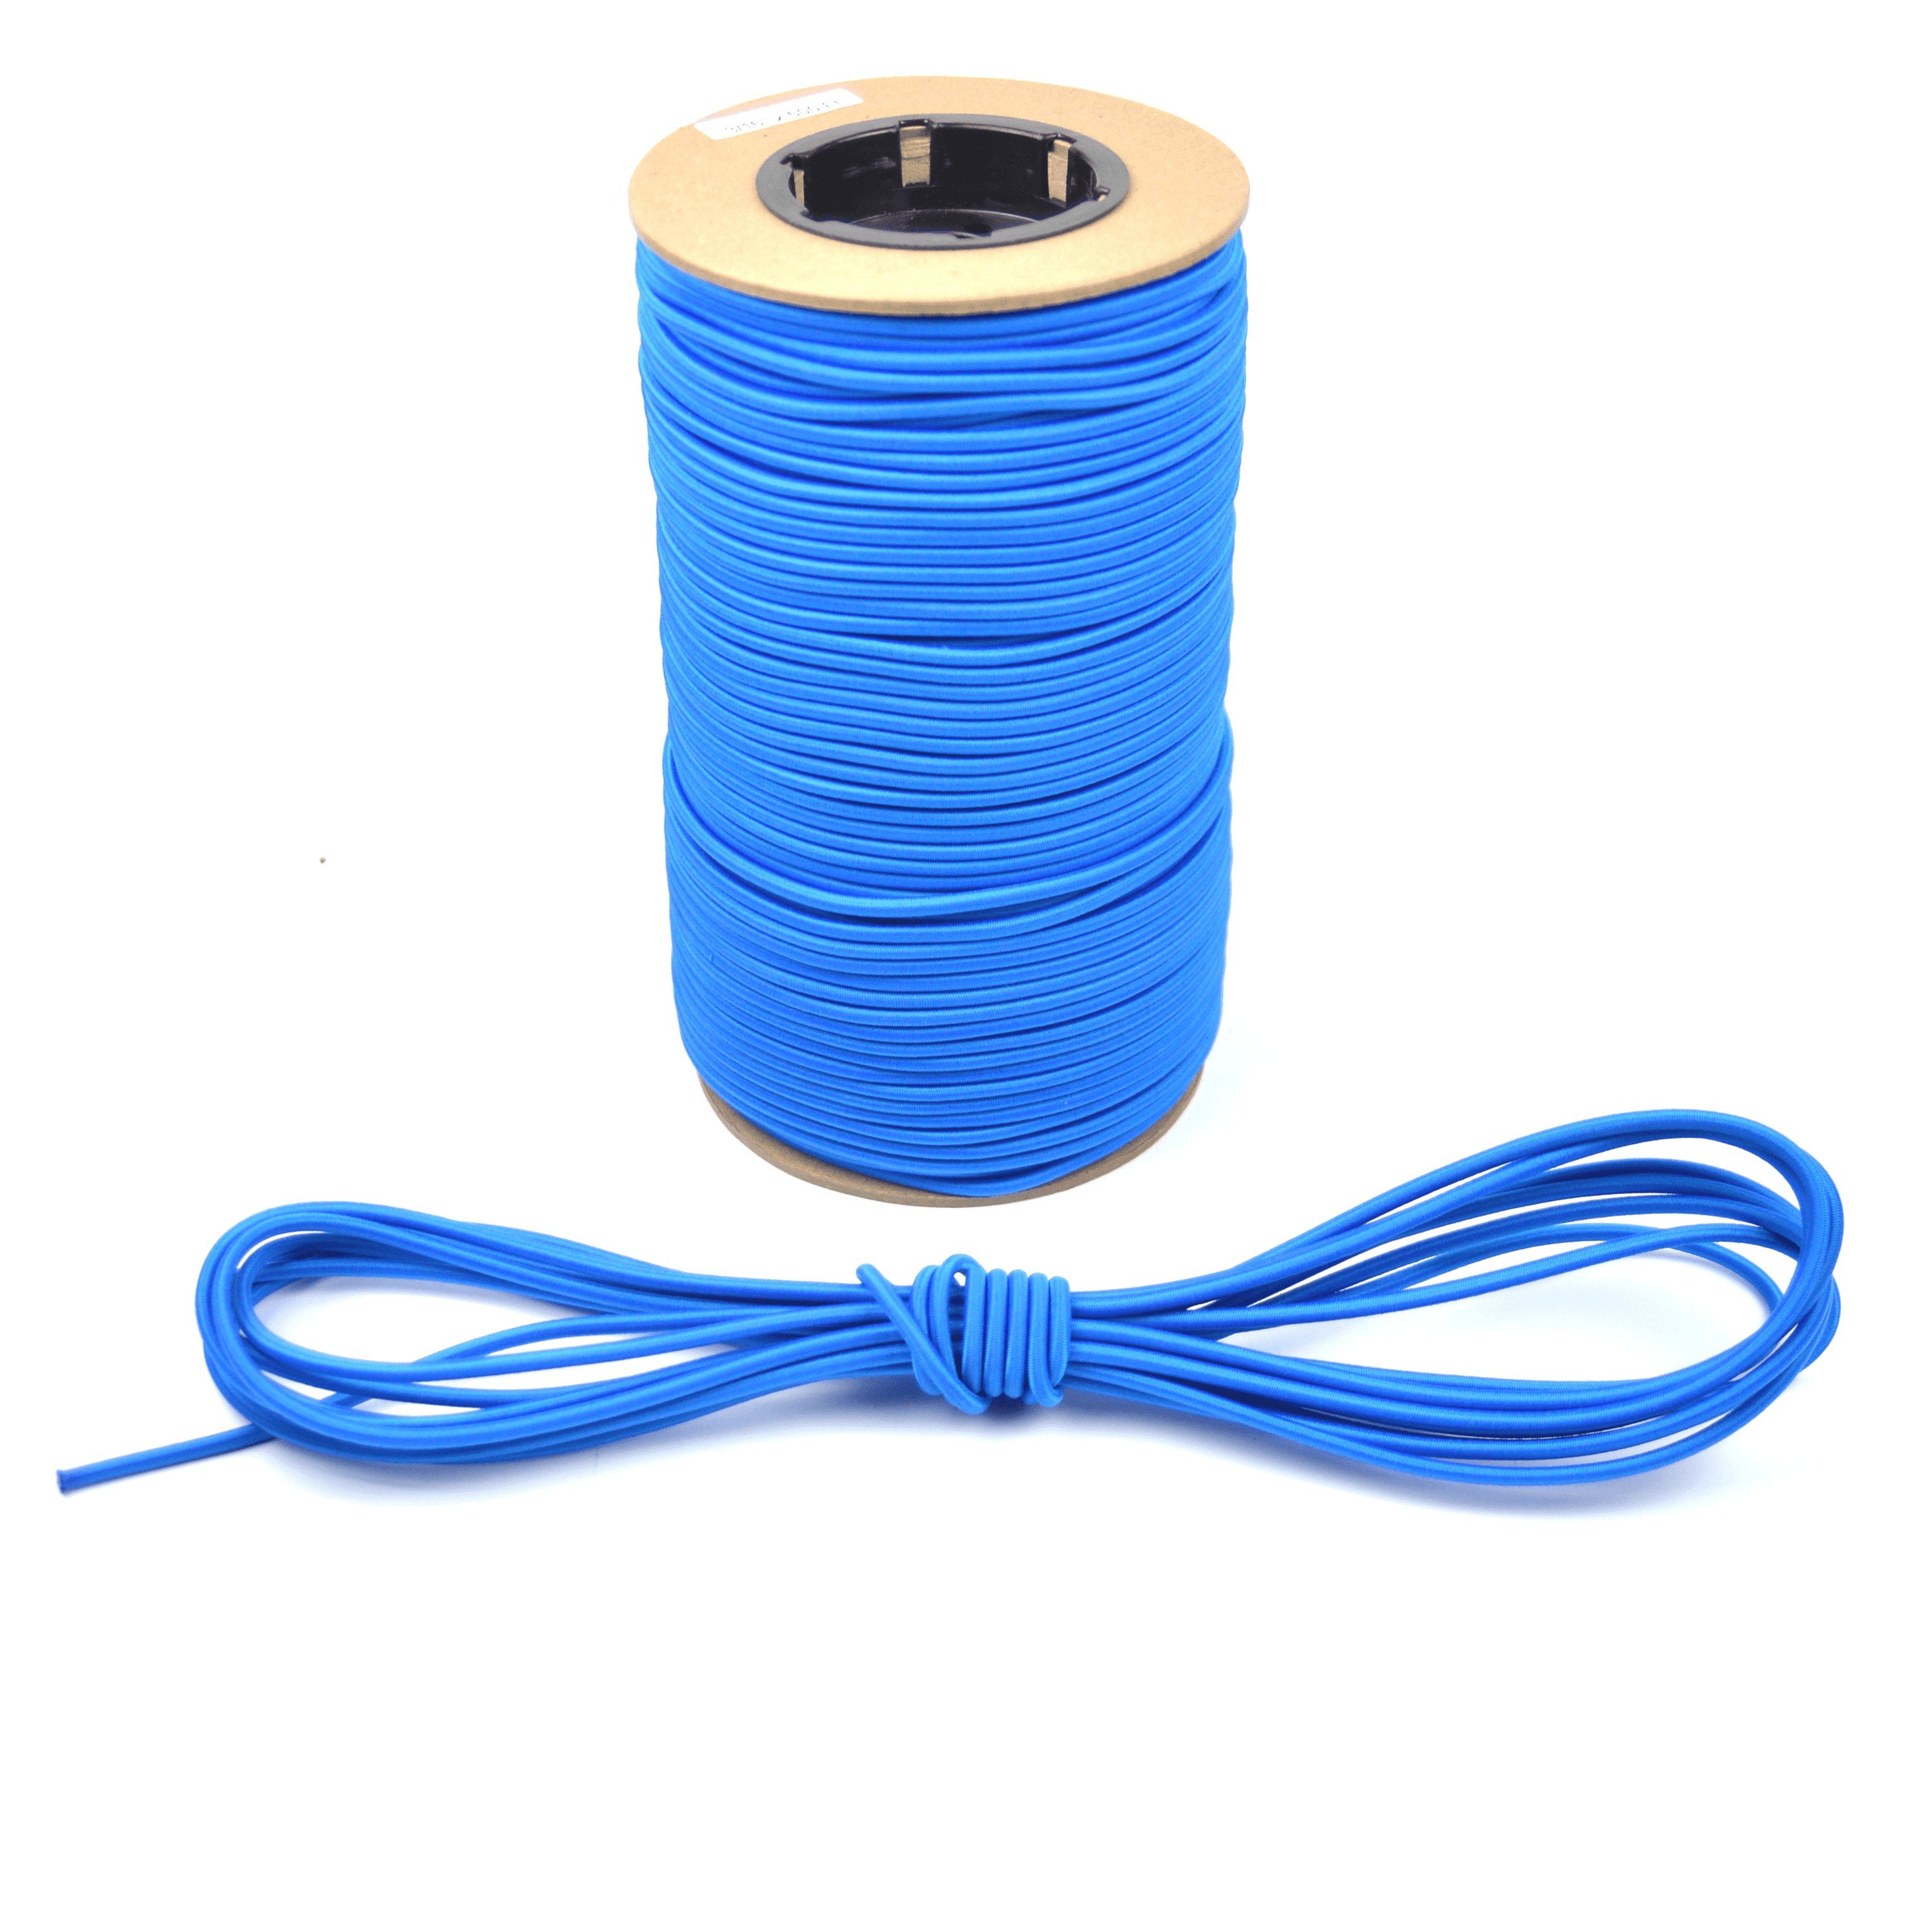 75ft 3/8" White Shock Cord Marine Grade Bungee Heavy Duty Tie Down Stretch Rope 